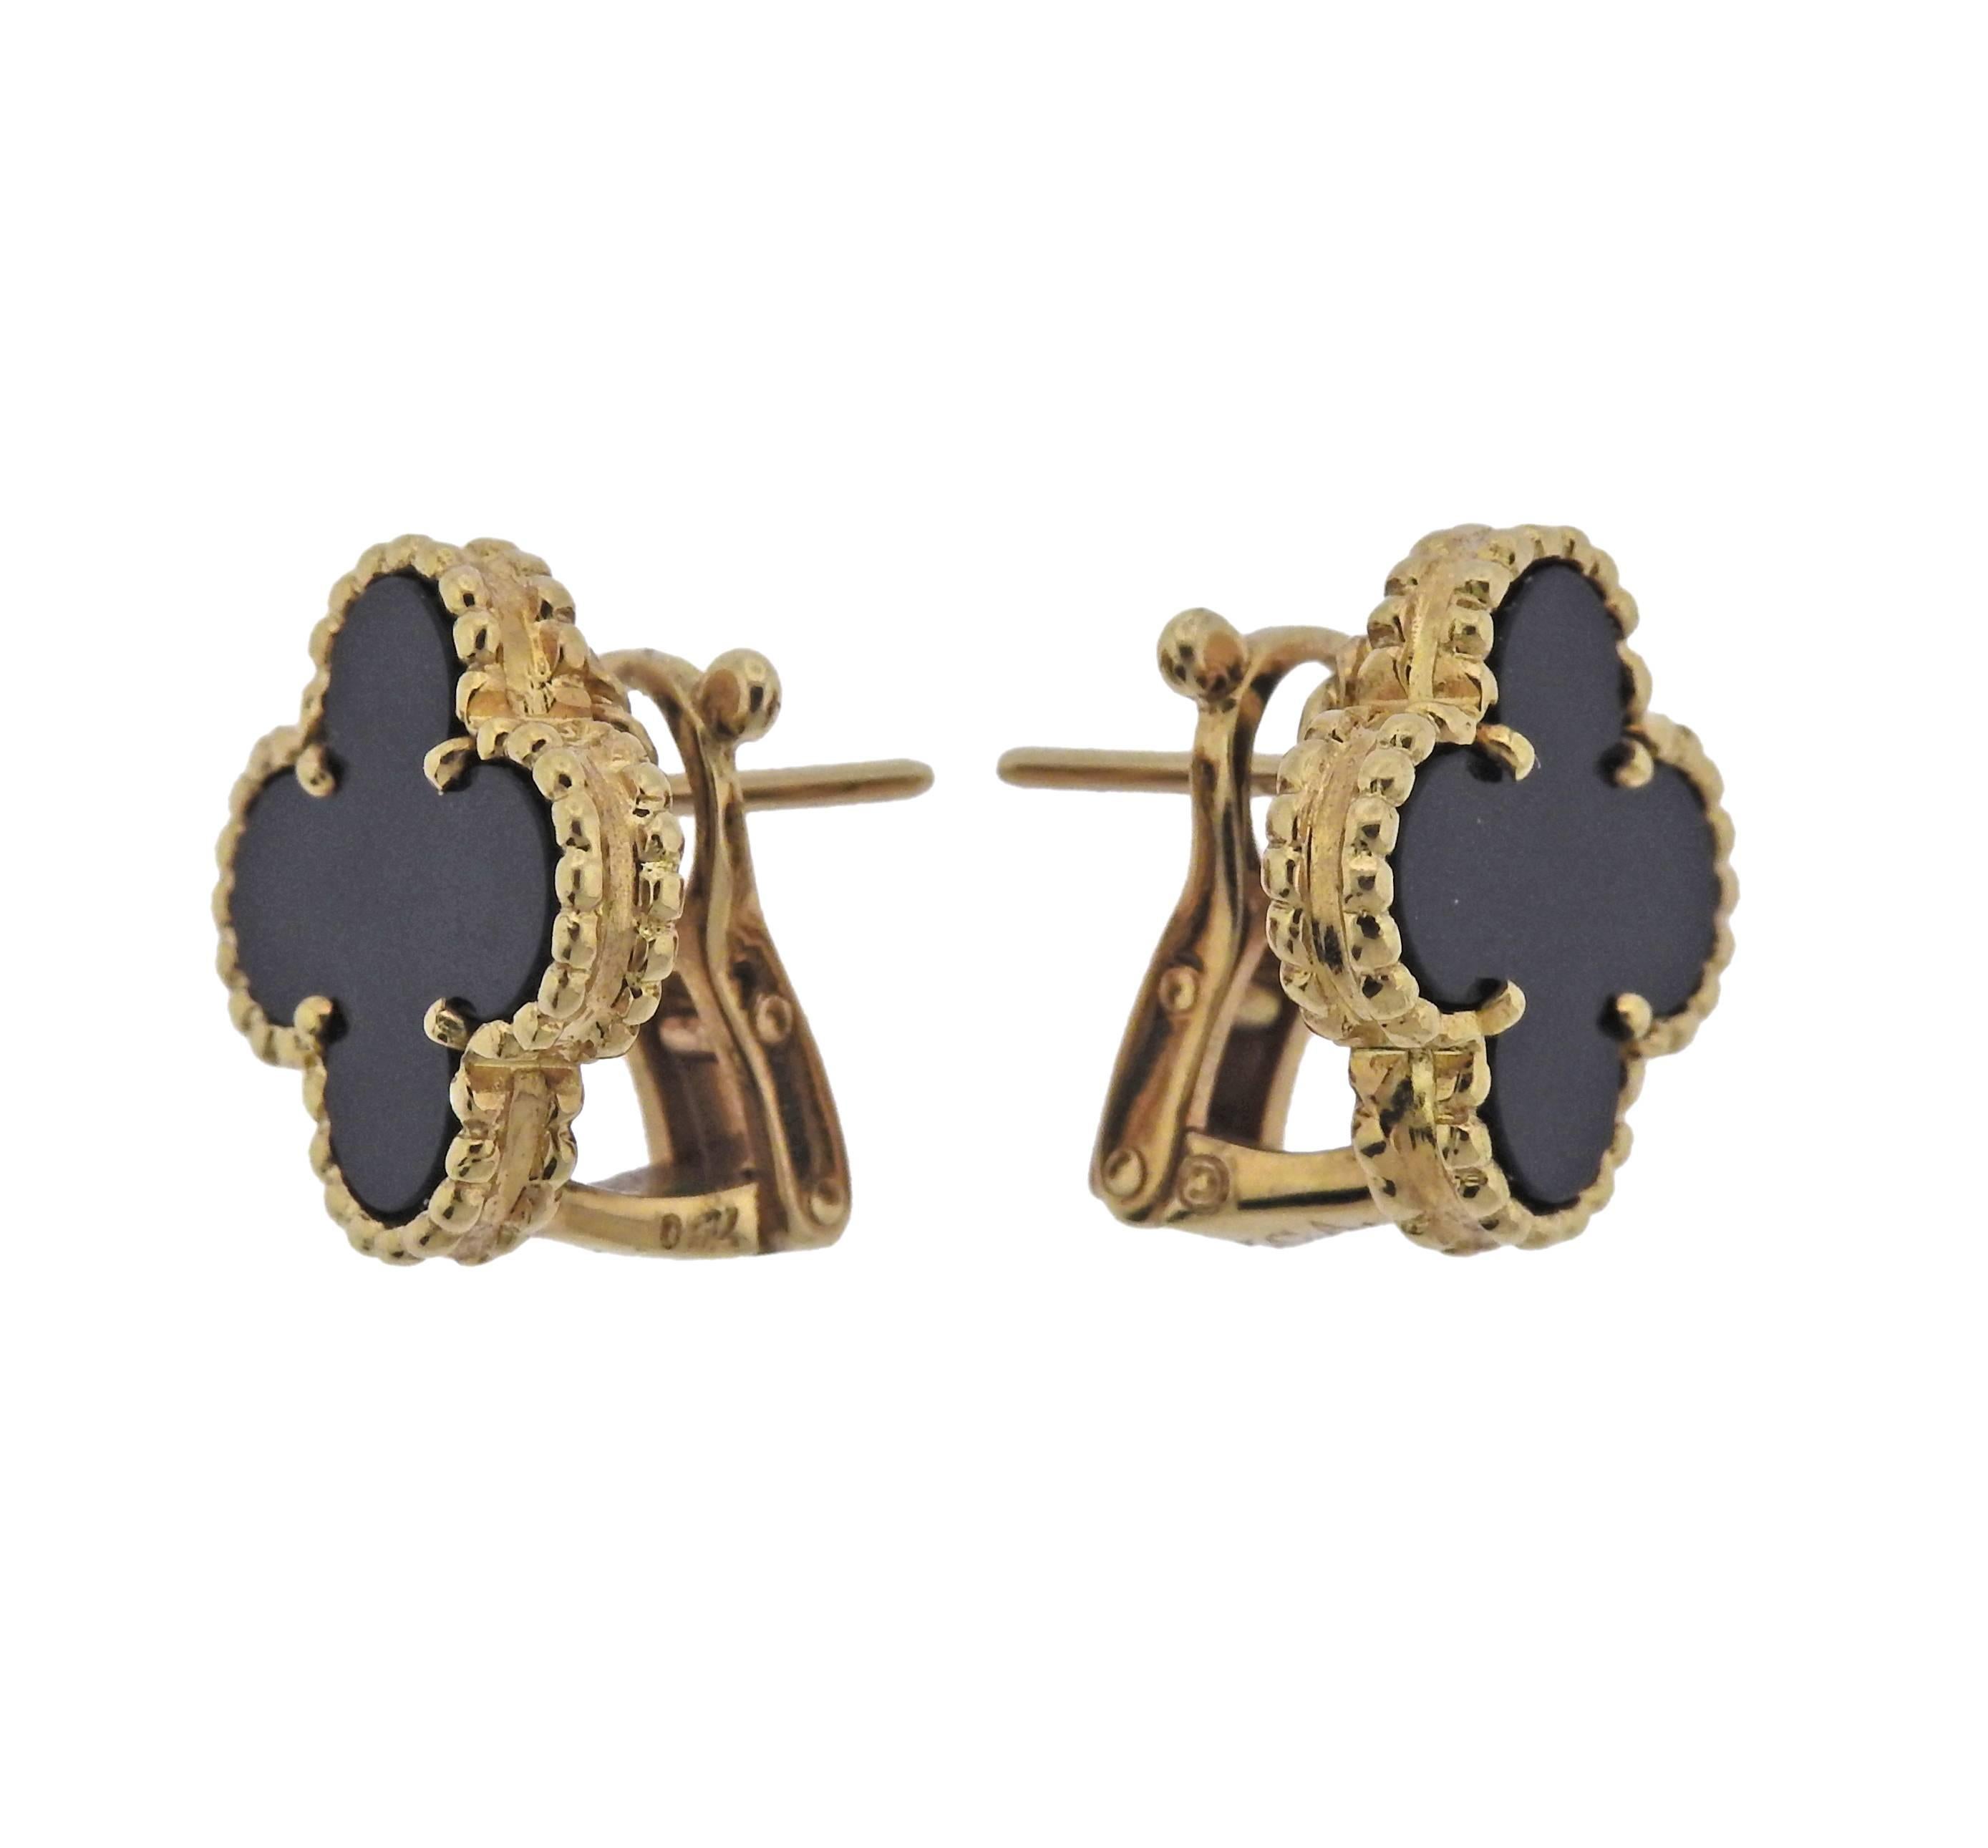 Iconic 18k yellow gold Alhambra earrings, set with onyx, crafted by Van Cleef & Arpels. Retail $4900, come with a pouch. Earrings are 15mm x 15mm, Weight is 7.6 grams.